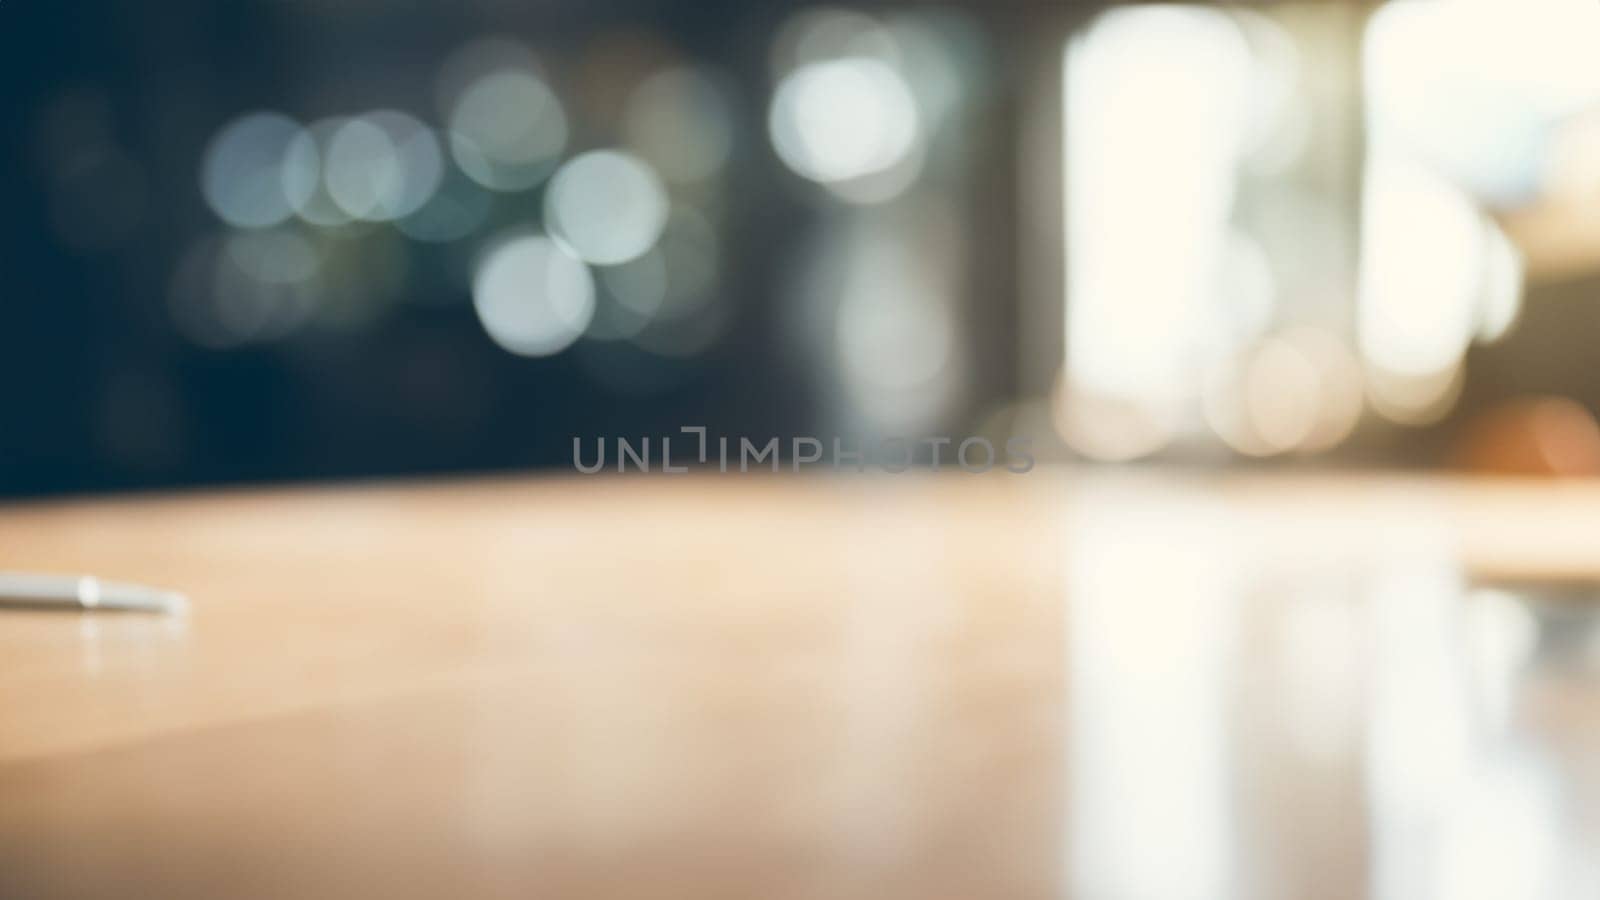 Blurred serene, unoccupied workspace bathed in natural light. Wooden desk with reflection. Minimalist beauty of uncluttered desk. Blurred Abstract Bokeh background for design by DesignMarjolein